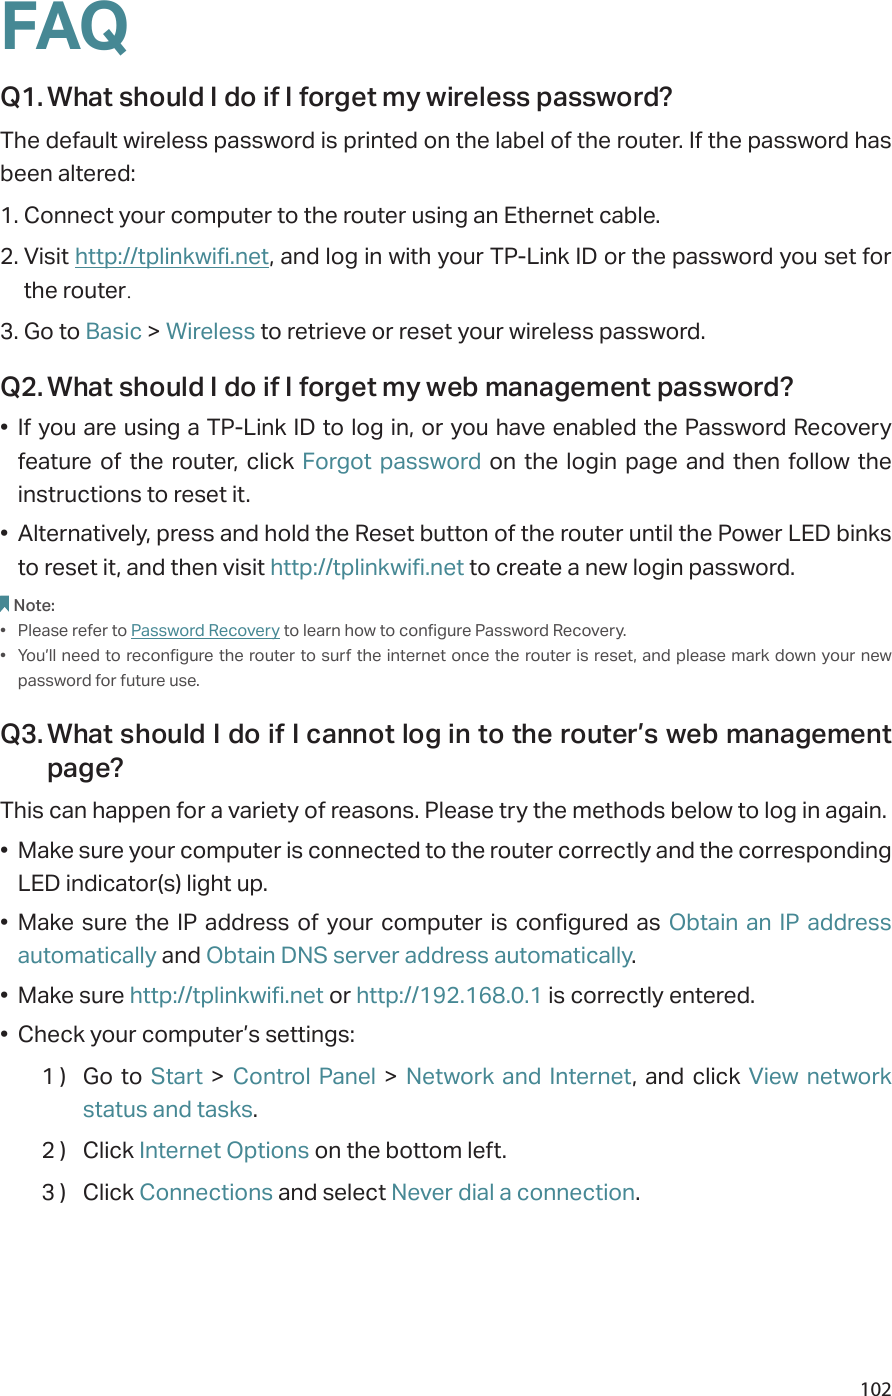 102FAQQ1. What should I do if I forget my wireless password?The default wireless password is printed on the label of the router. If the password has been altered:1. Connect your computer to the router using an Ethernet cable. 2. Visit http://tplinkwifi.net, and log in with your TP-Link ID or the password you set for the router.3. Go to Basic &gt; Wireless to retrieve or reset your wireless password.Q2. What should I do if I forget my web management password?•  If you are using a TP-Link ID to log in, or you have enabled the Password Recovery feature of the router, click Forgot password on the login page and then follow the instructions to reset it.•  Alternatively, press and hold the Reset button of the router until the Power LED binks to reset it, and then visit http://tplinkwifi.net to create a new login password.Note: •  Please refer to Password Recovery to learn how to configure Password Recovery.•  You’ll need to reconfigure the router to surf the internet once the router is reset, and  please mark down your new password for future use.Q3. What should I do if I cannot log in to the router’s web management page?This can happen for a variety of reasons. Please try the methods below to log in again.•  Make sure your computer is connected to the router correctly and the corresponding LED indicator(s) light up.•  Make sure the IP address of your computer is configured as Obtain an IP address automatically and Obtain DNS server address automatically.•  Make sure http://tplinkwifi.net or http://192.168.0.1 is correctly entered.•  Check your computer’s settings:1 )  Go to Start &gt; Control Panel &gt; Network and Internet, and click View network status and tasks.2 )  Click Internet Options on the bottom left.3 )  Click Connections and select Never dial a connection.